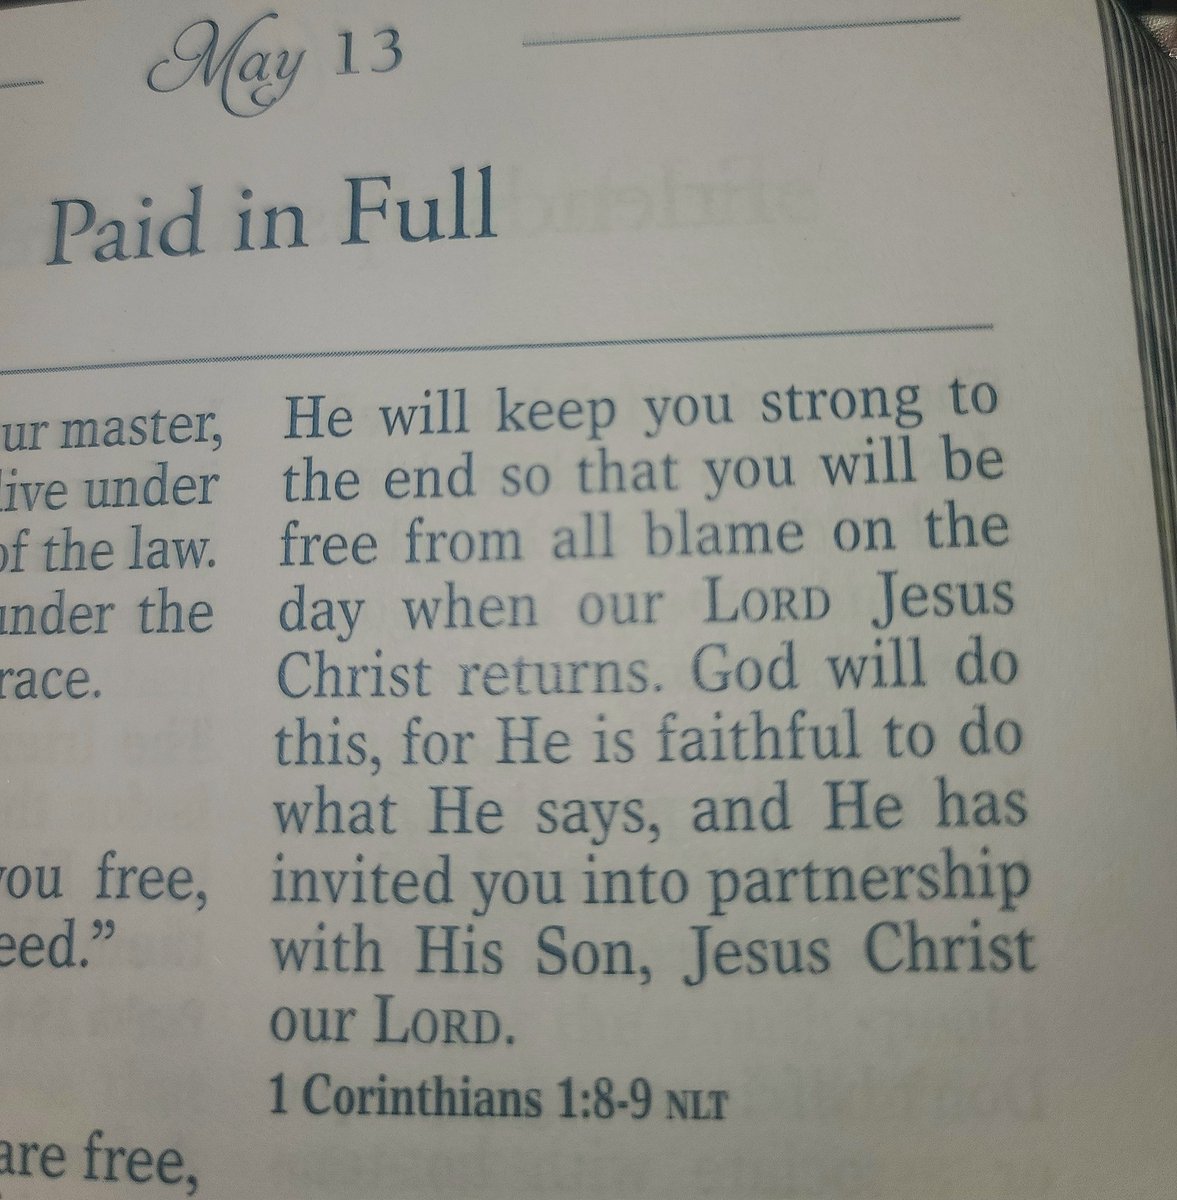 PAID IN FULL Is this not the most beautiful promise? There is no other hope. I'm clinging to it.